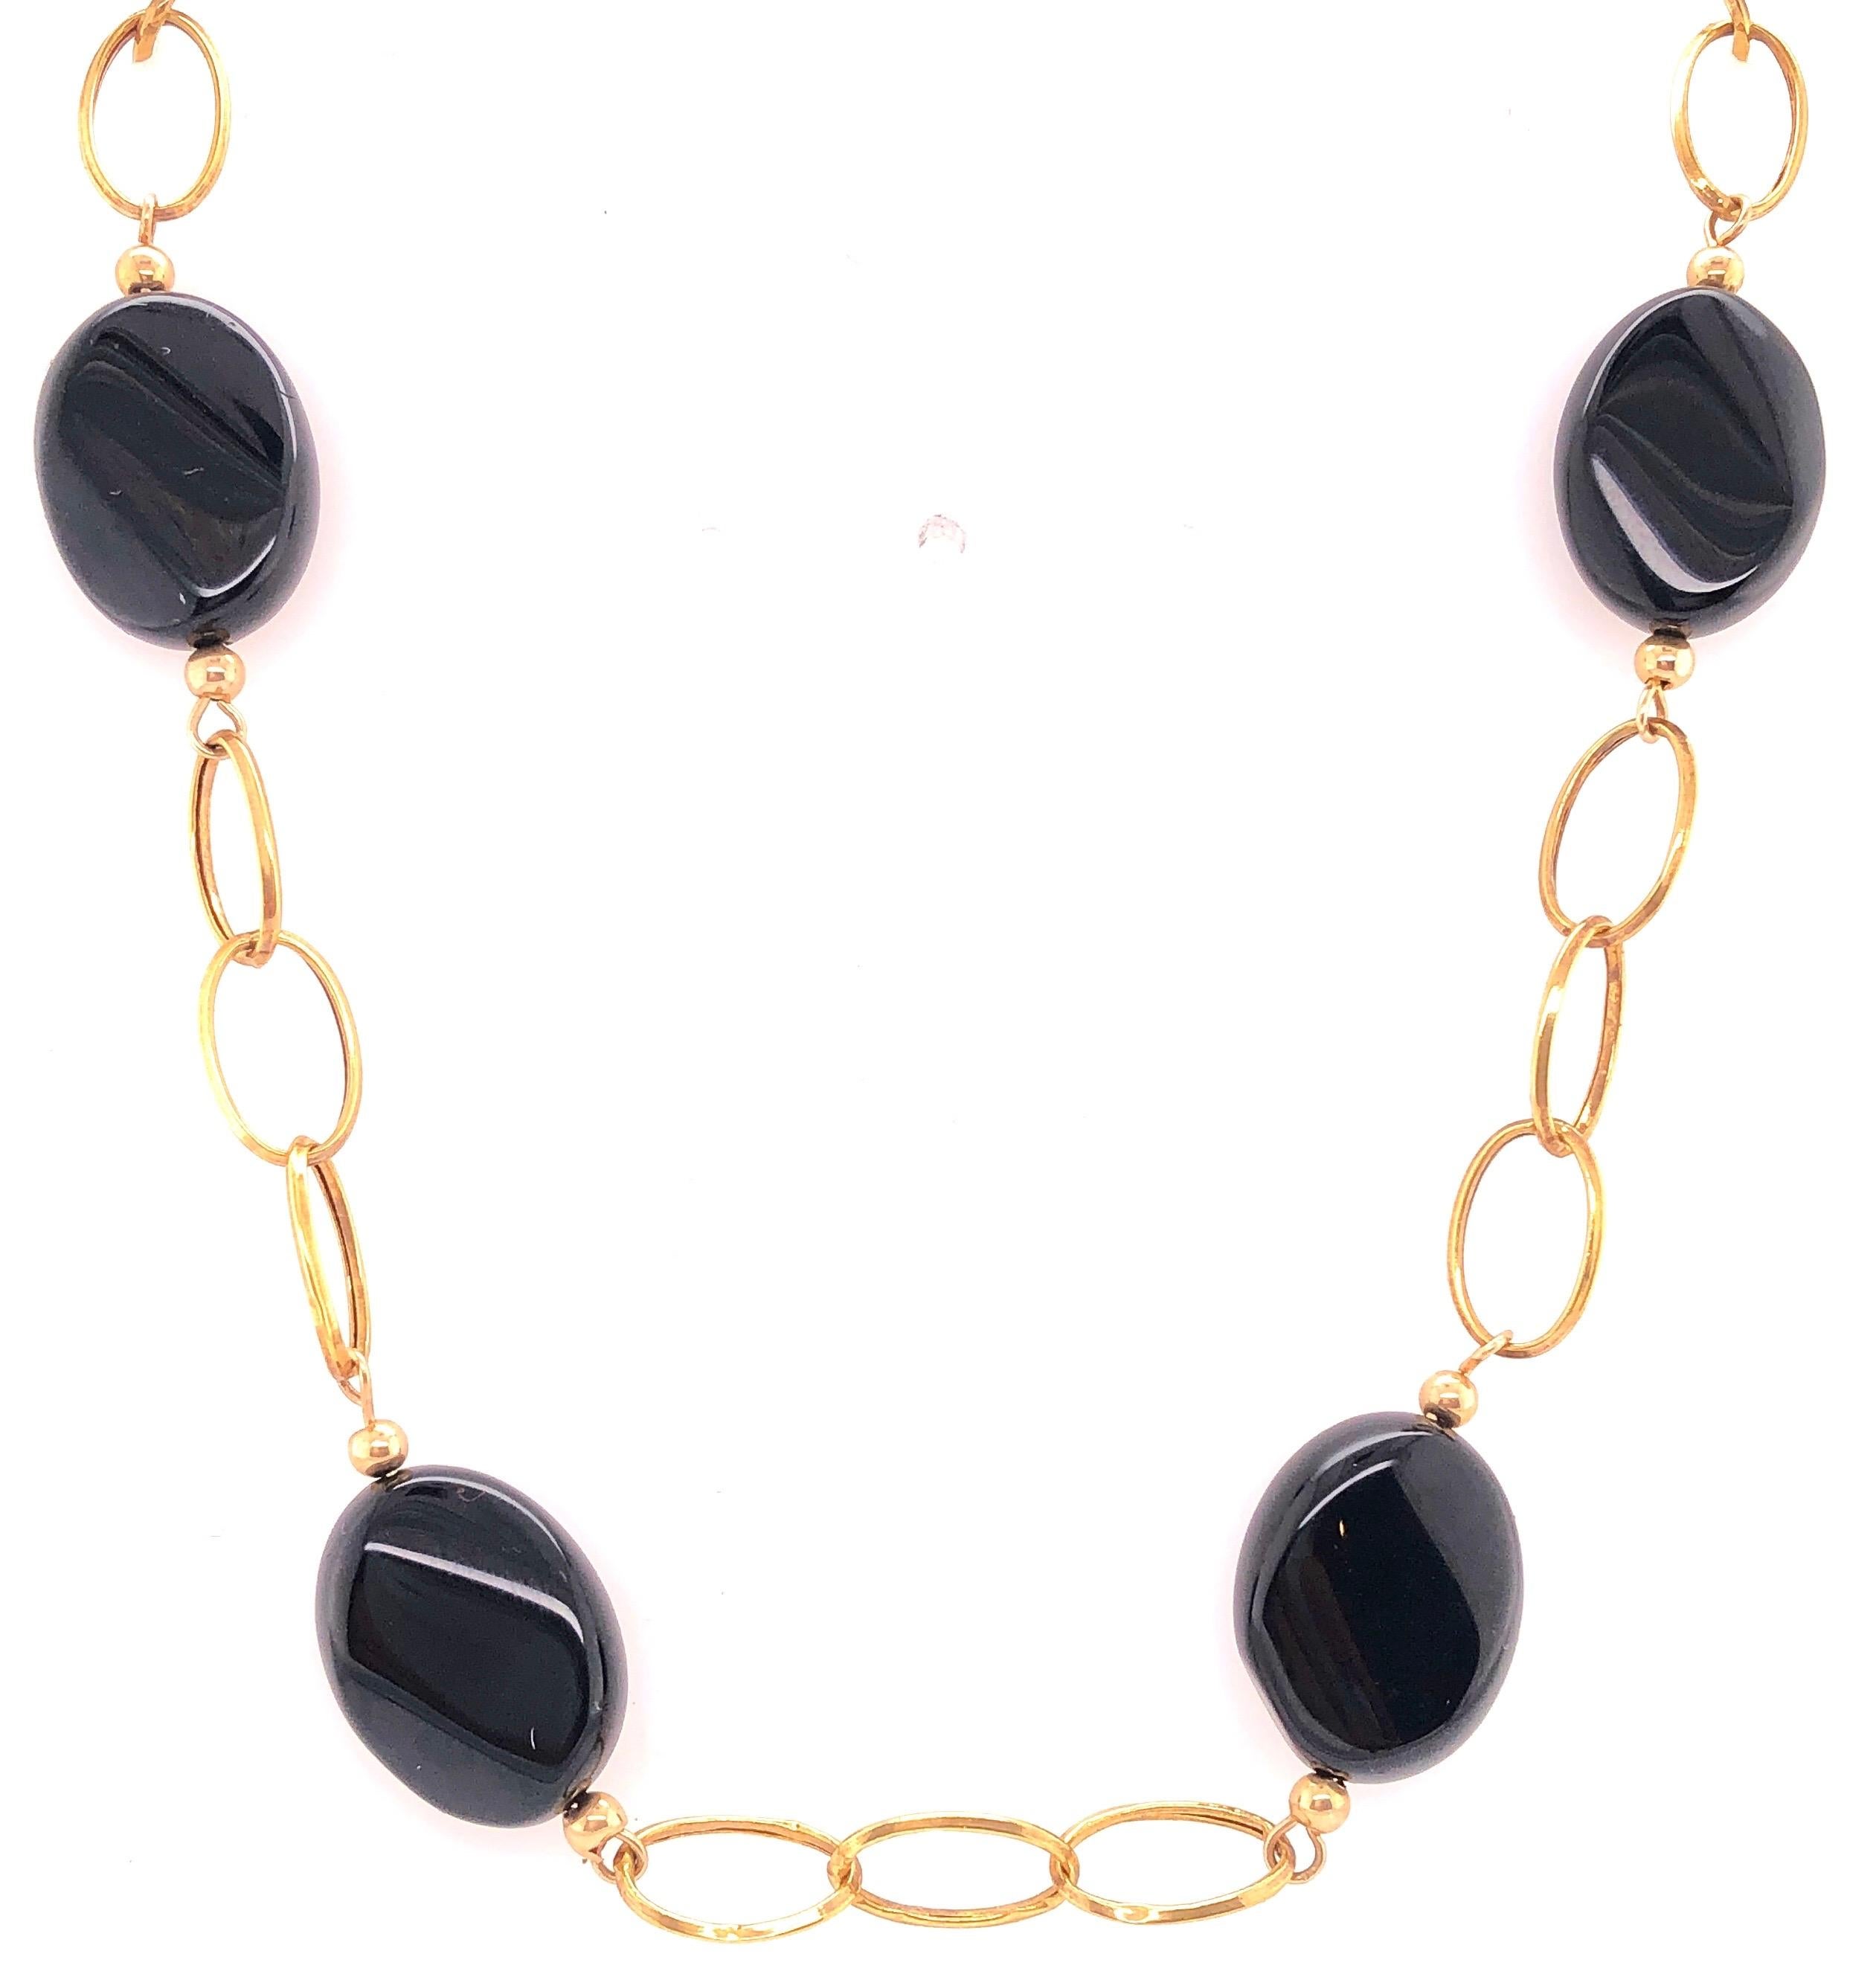 14 Karat Yellow Gold Link Necklace with Ebony Stones 21.2 Grams Total For Sale 12